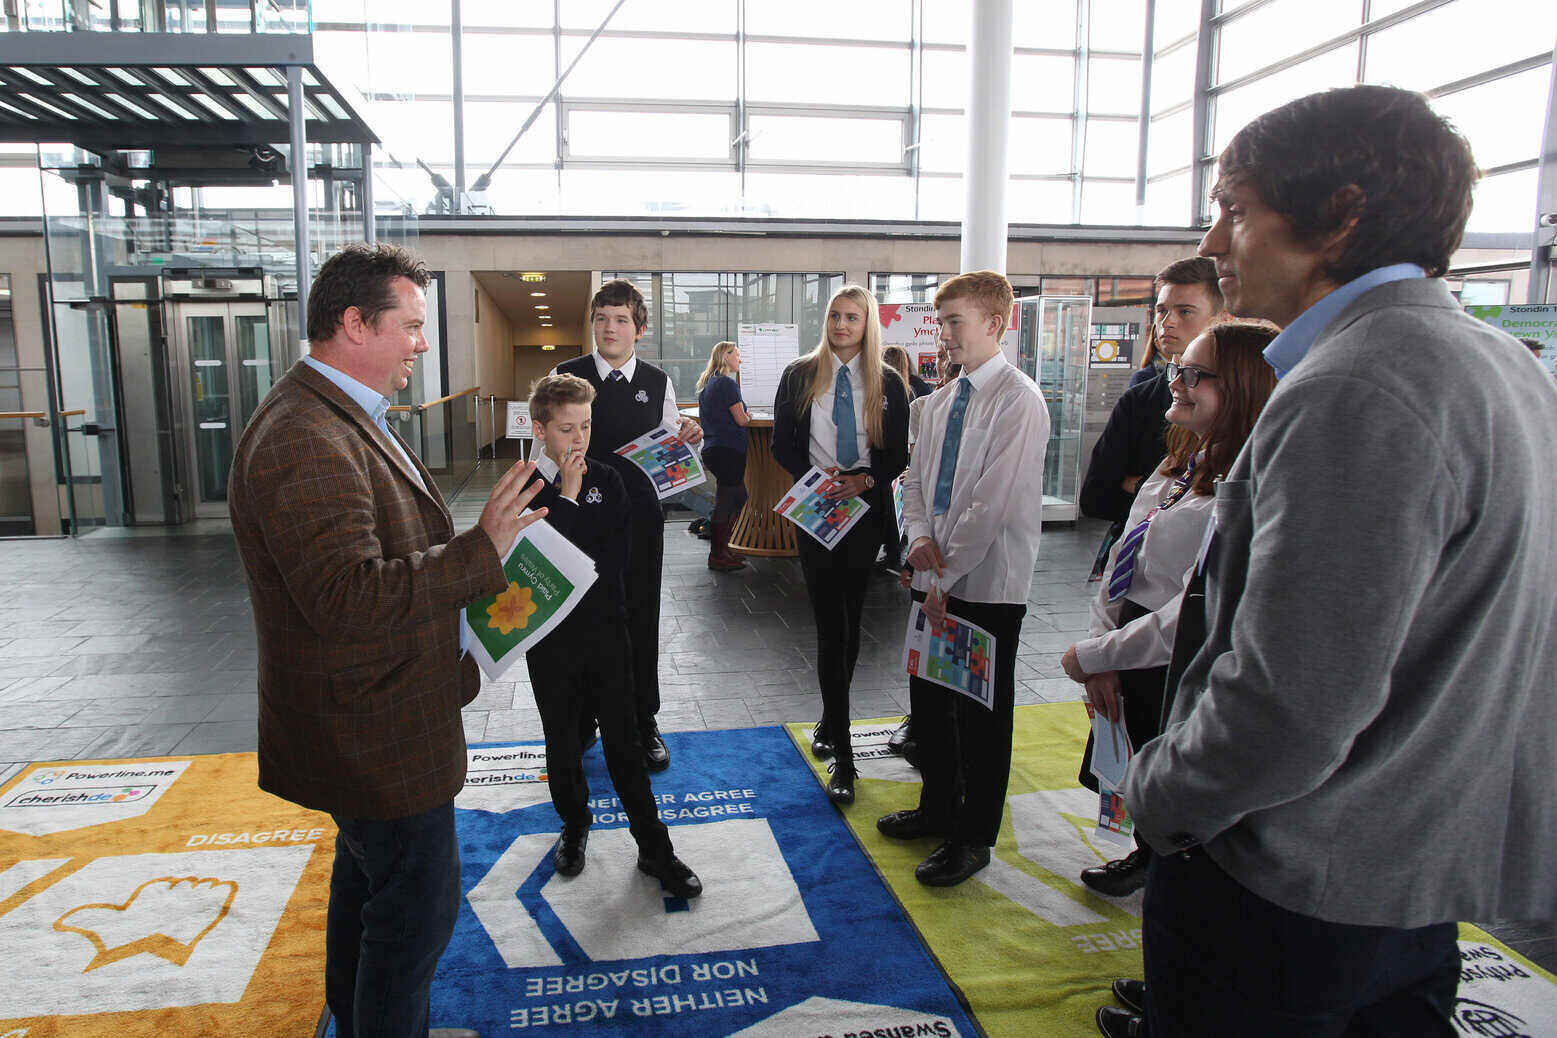 Matt Wall in Senedd with young people